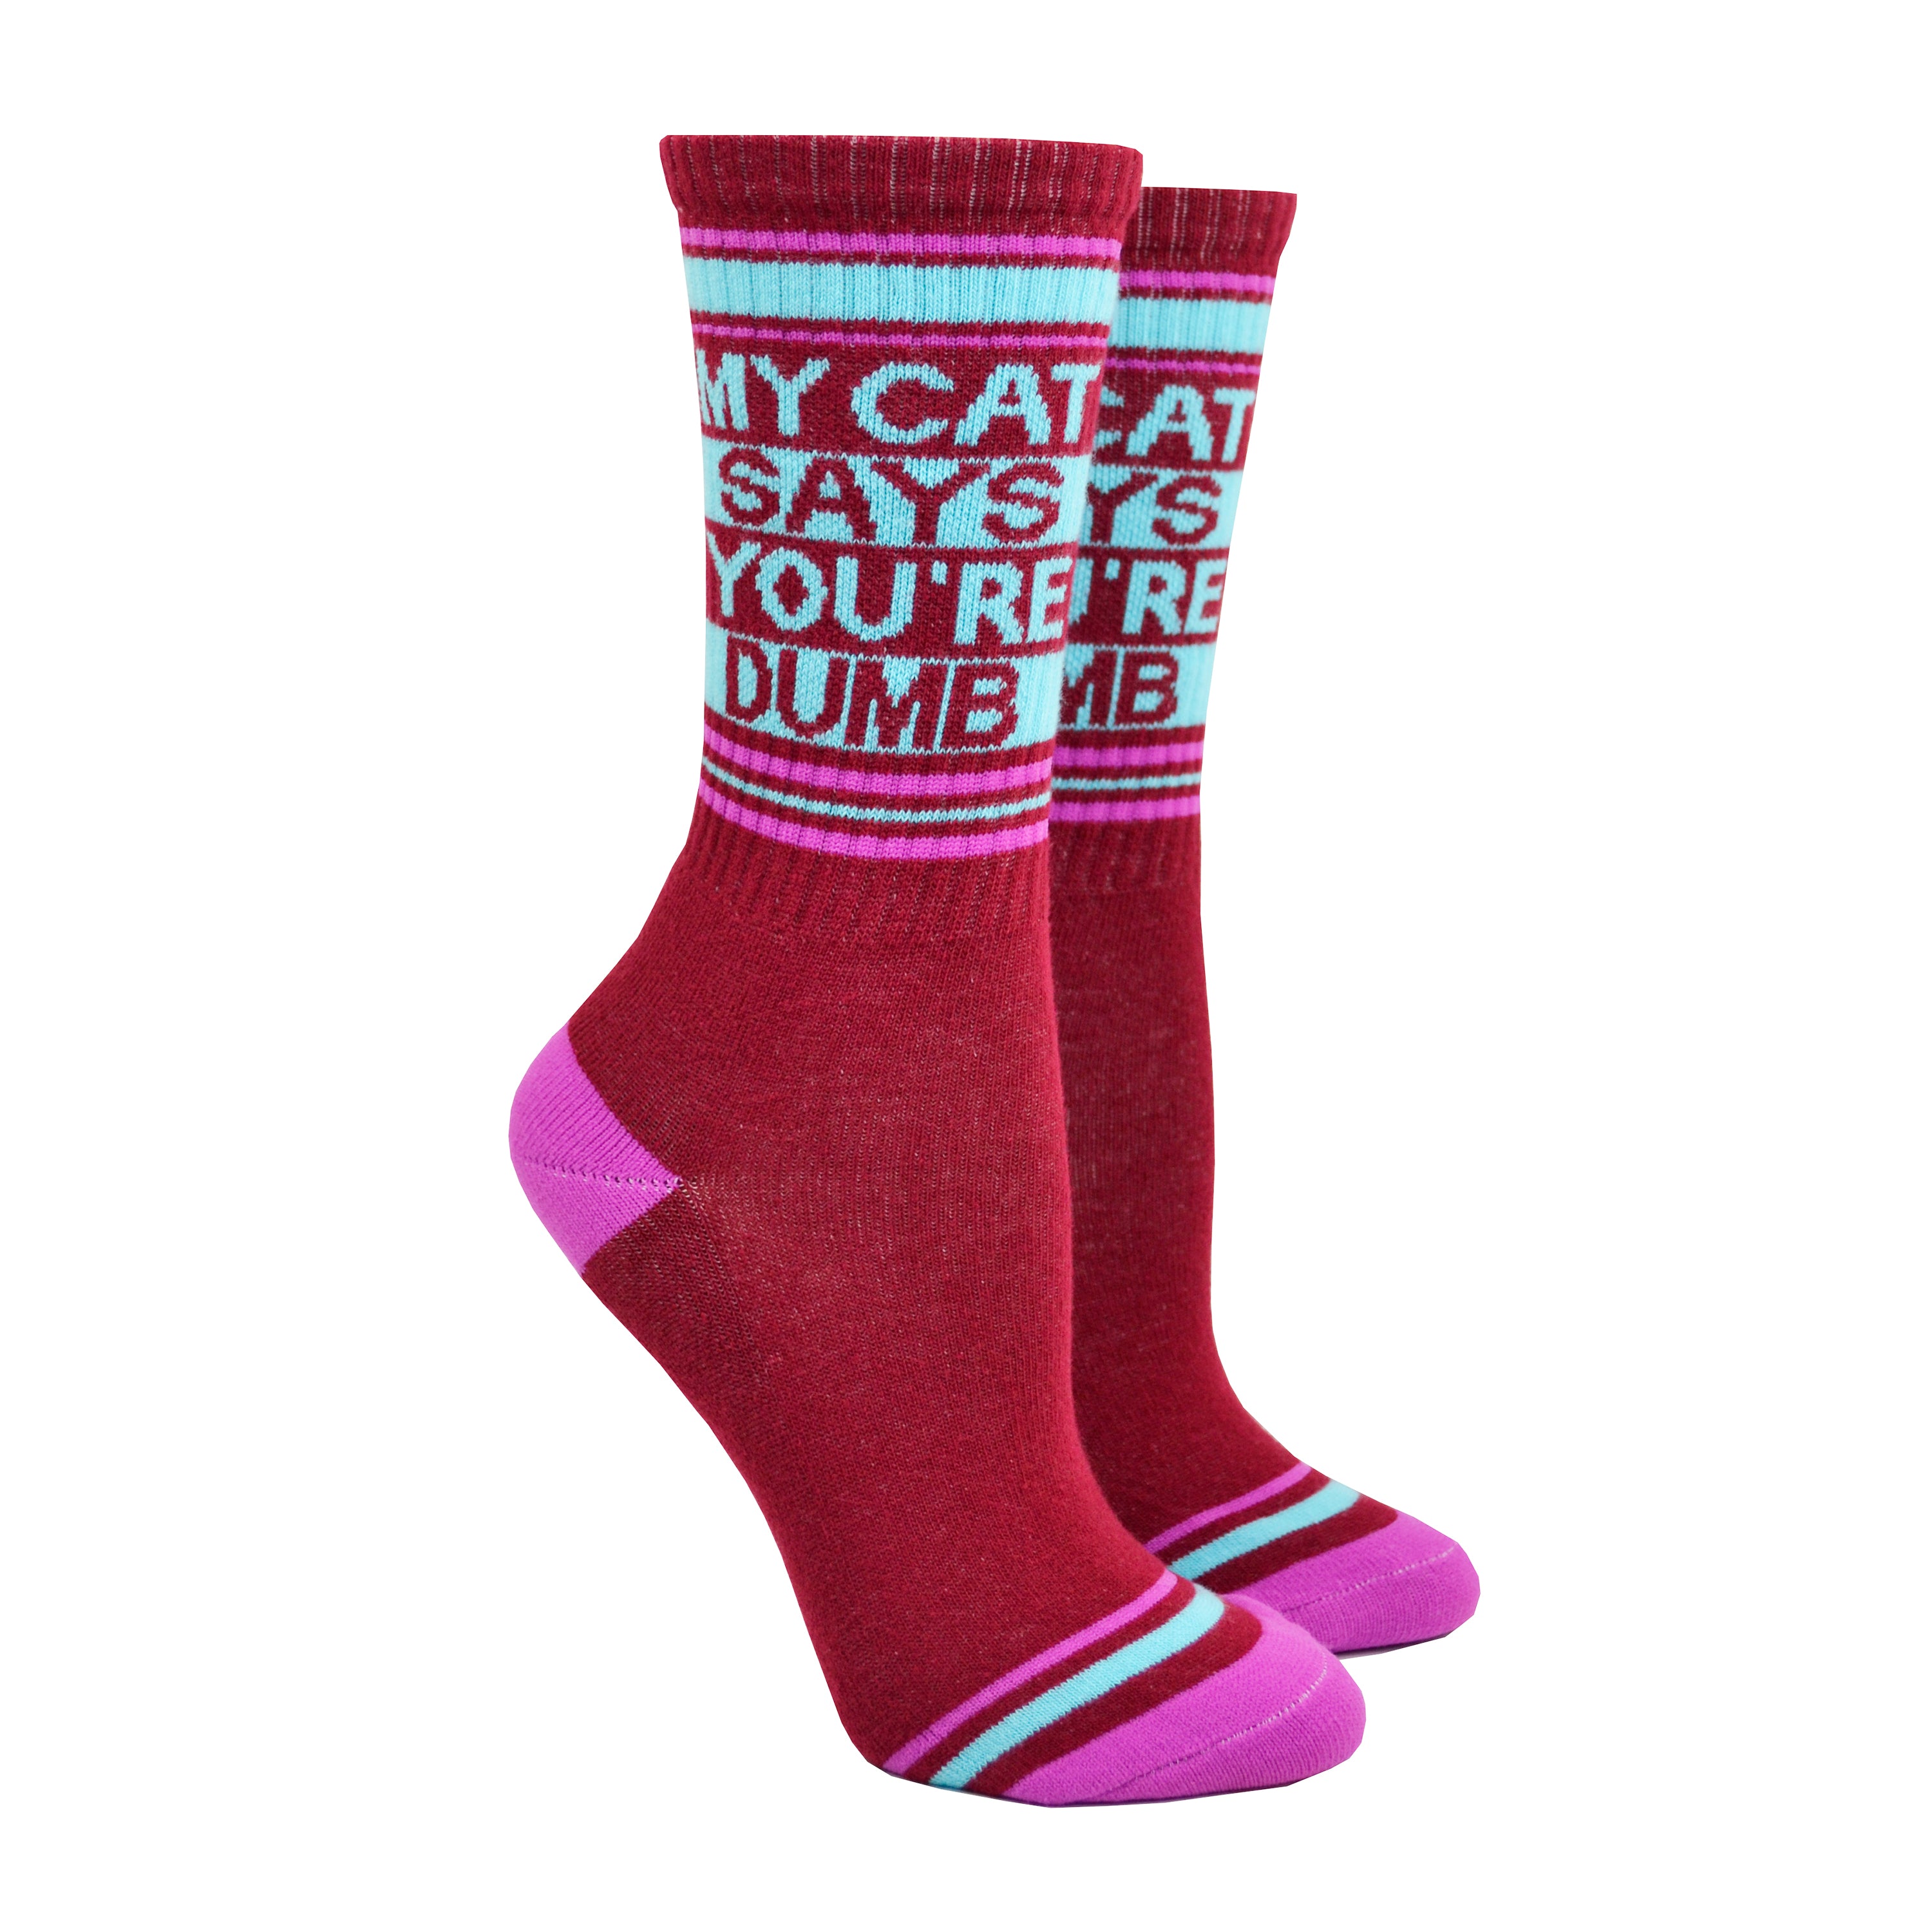 Shown on leg forms, a pair of Gumball Poodle brand unisex cotton crew socks in maroon with a magenta heel/toe and a blue striped cuff that says, 'MY CAT SAYS YOUR'RE DUMB